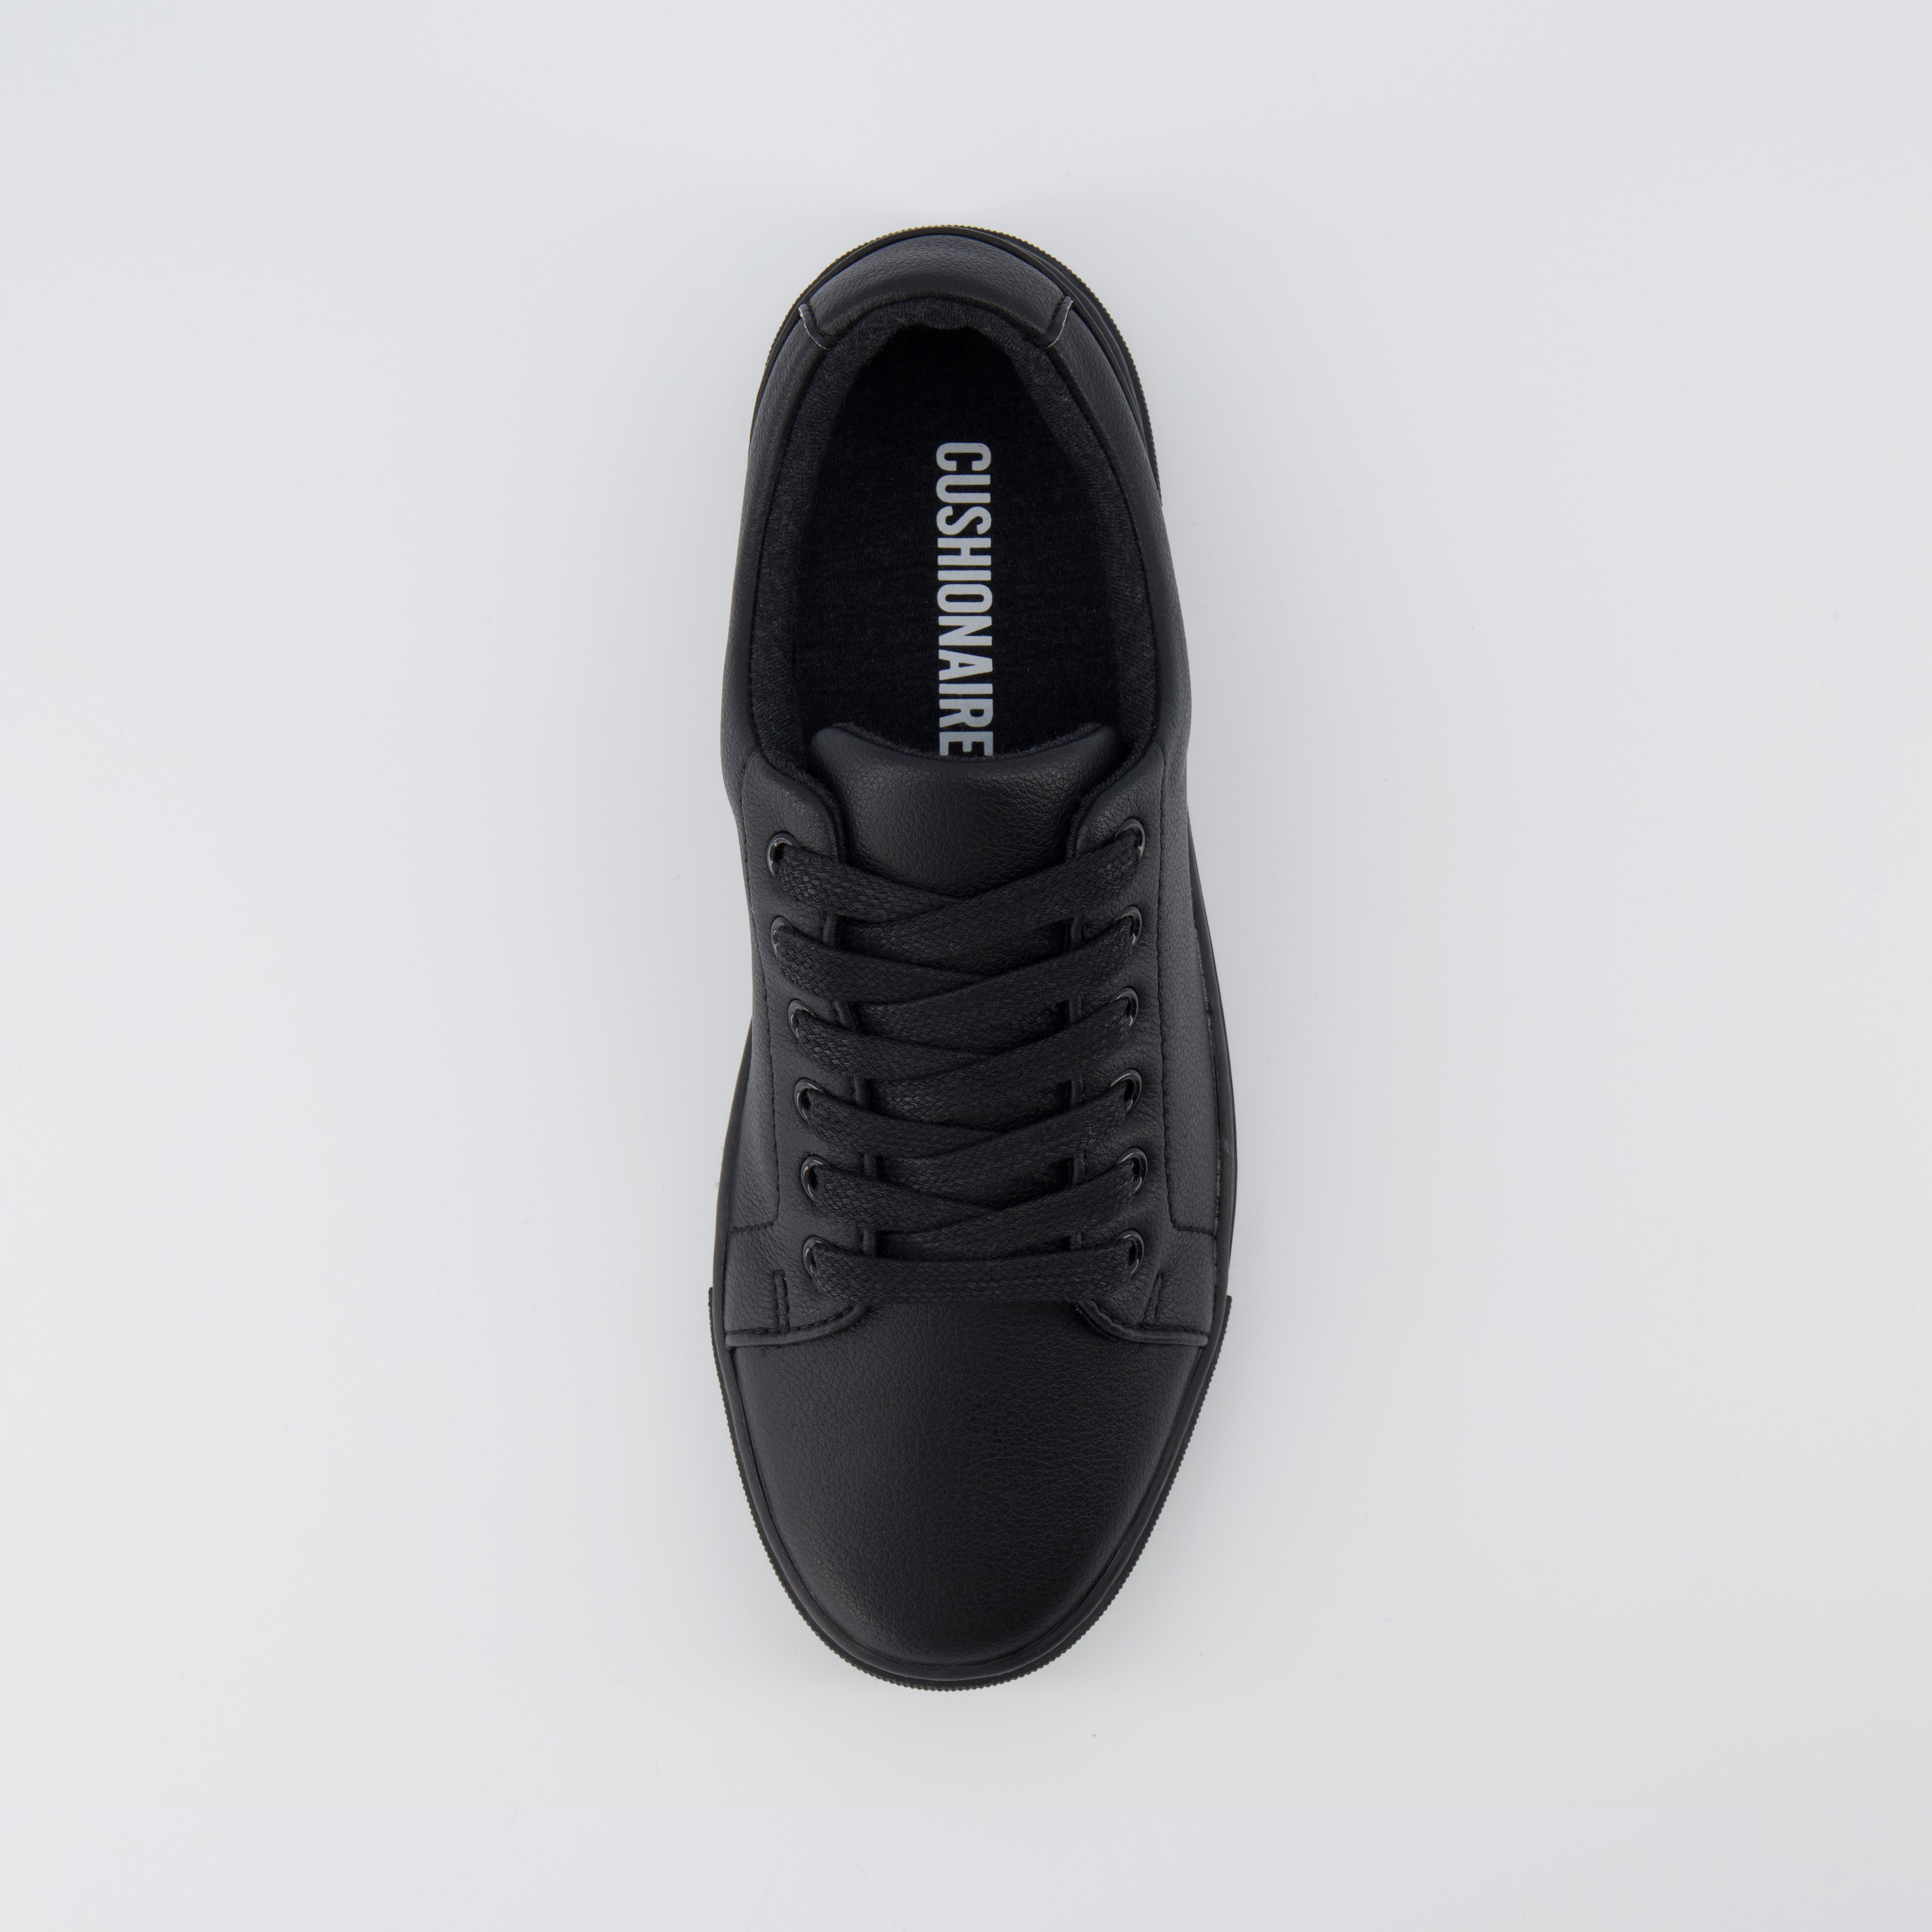 Hashtag Lace-up Sneaker